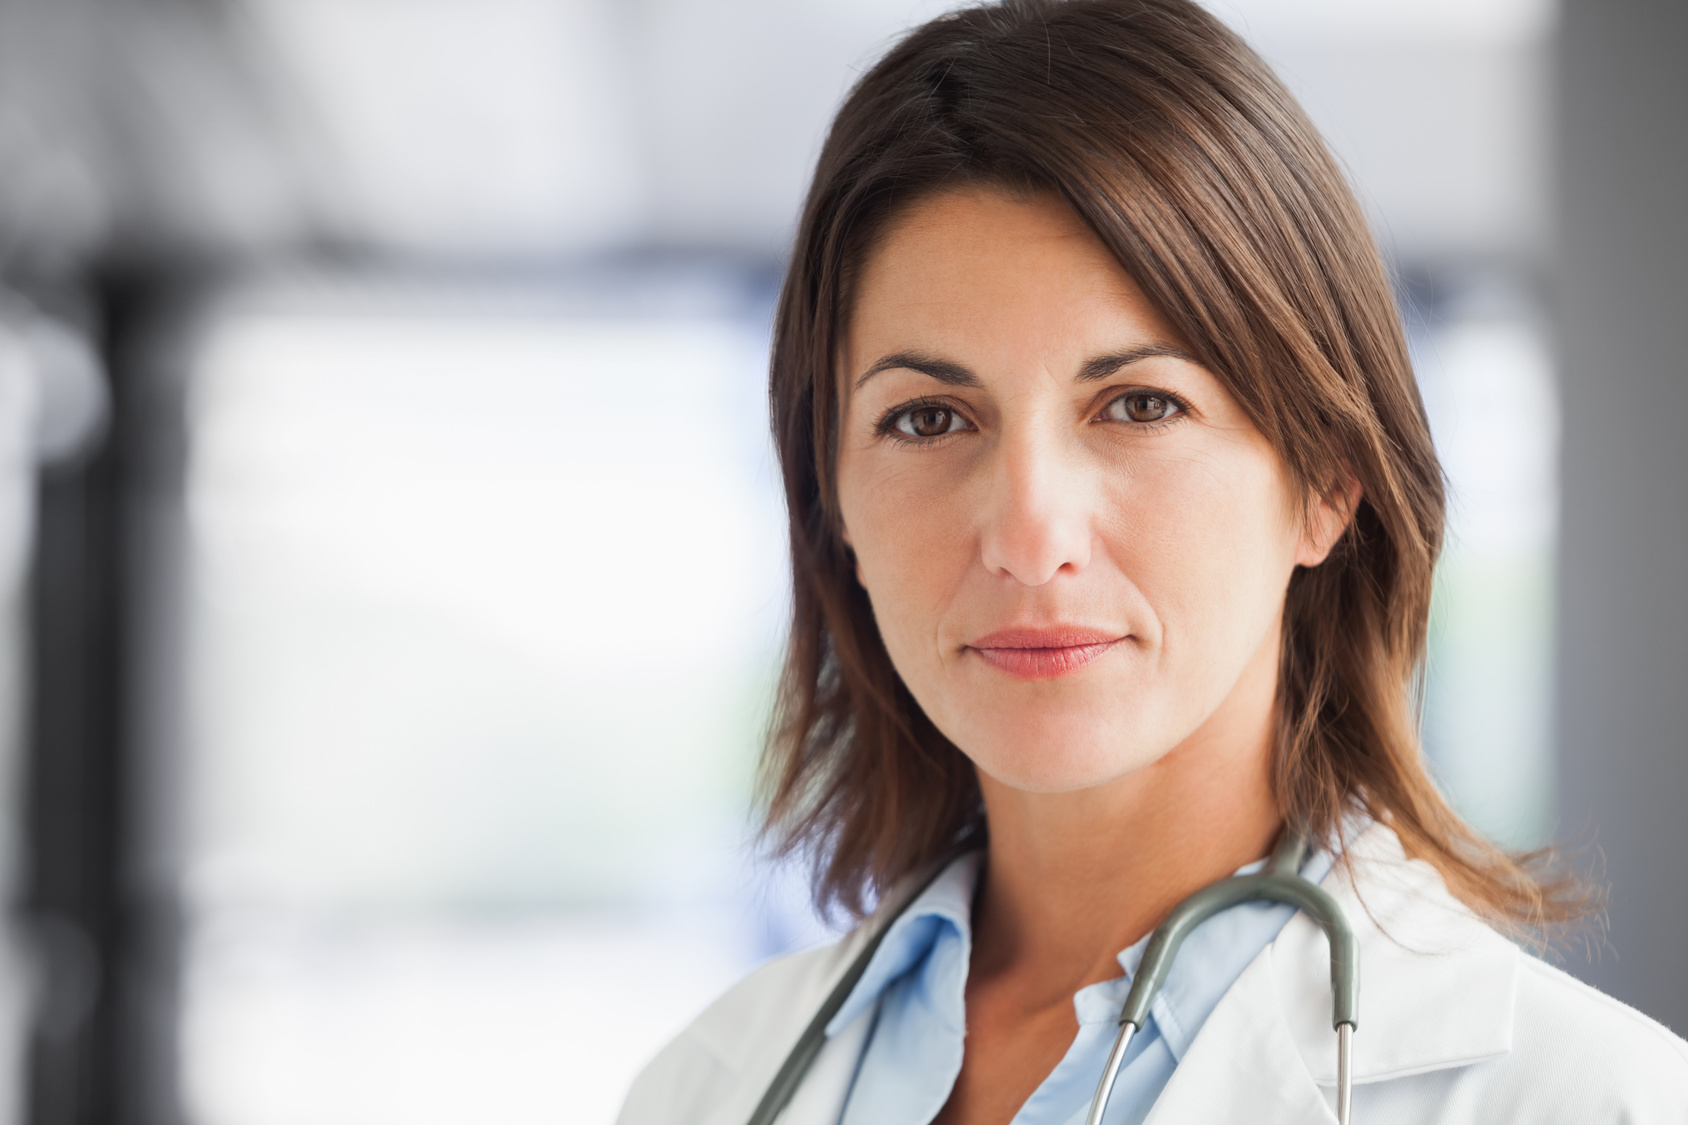 Gender Pay Gap Tops $36K for New Physicians